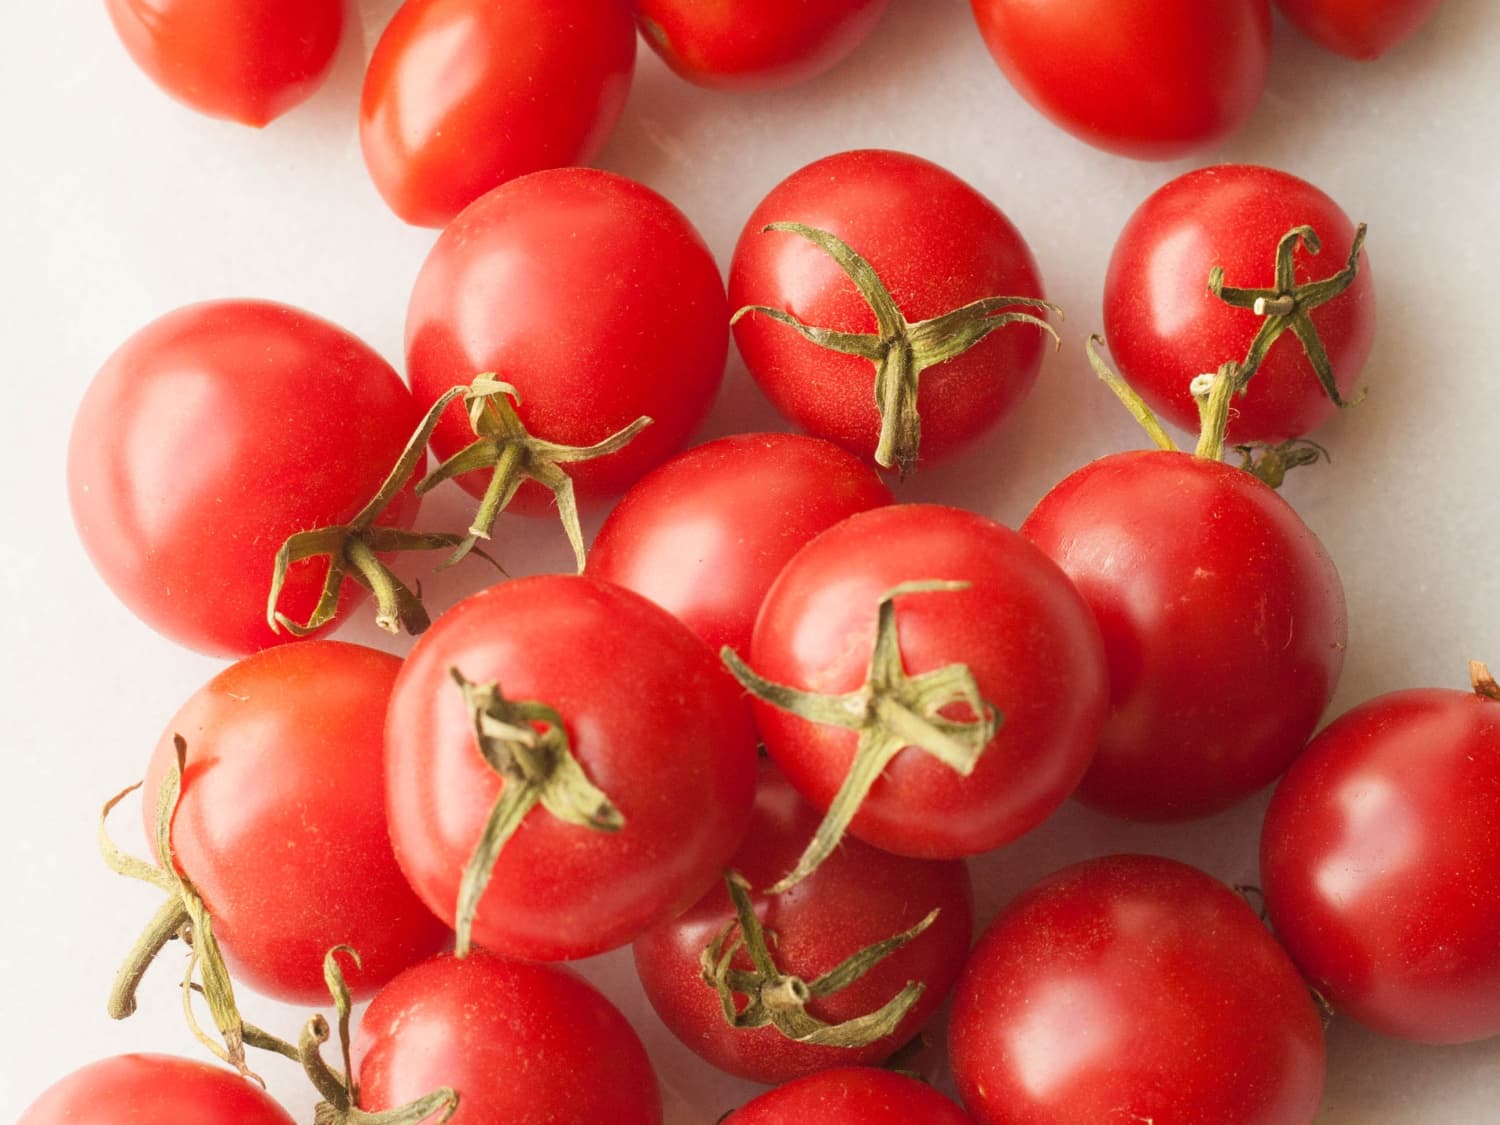 grape tomatoes as a healthy picnic food ideas and a picnic food that is easy to pack for a date, a picnic food for toddlers, or a picnic food for couples on an outdoor covid date